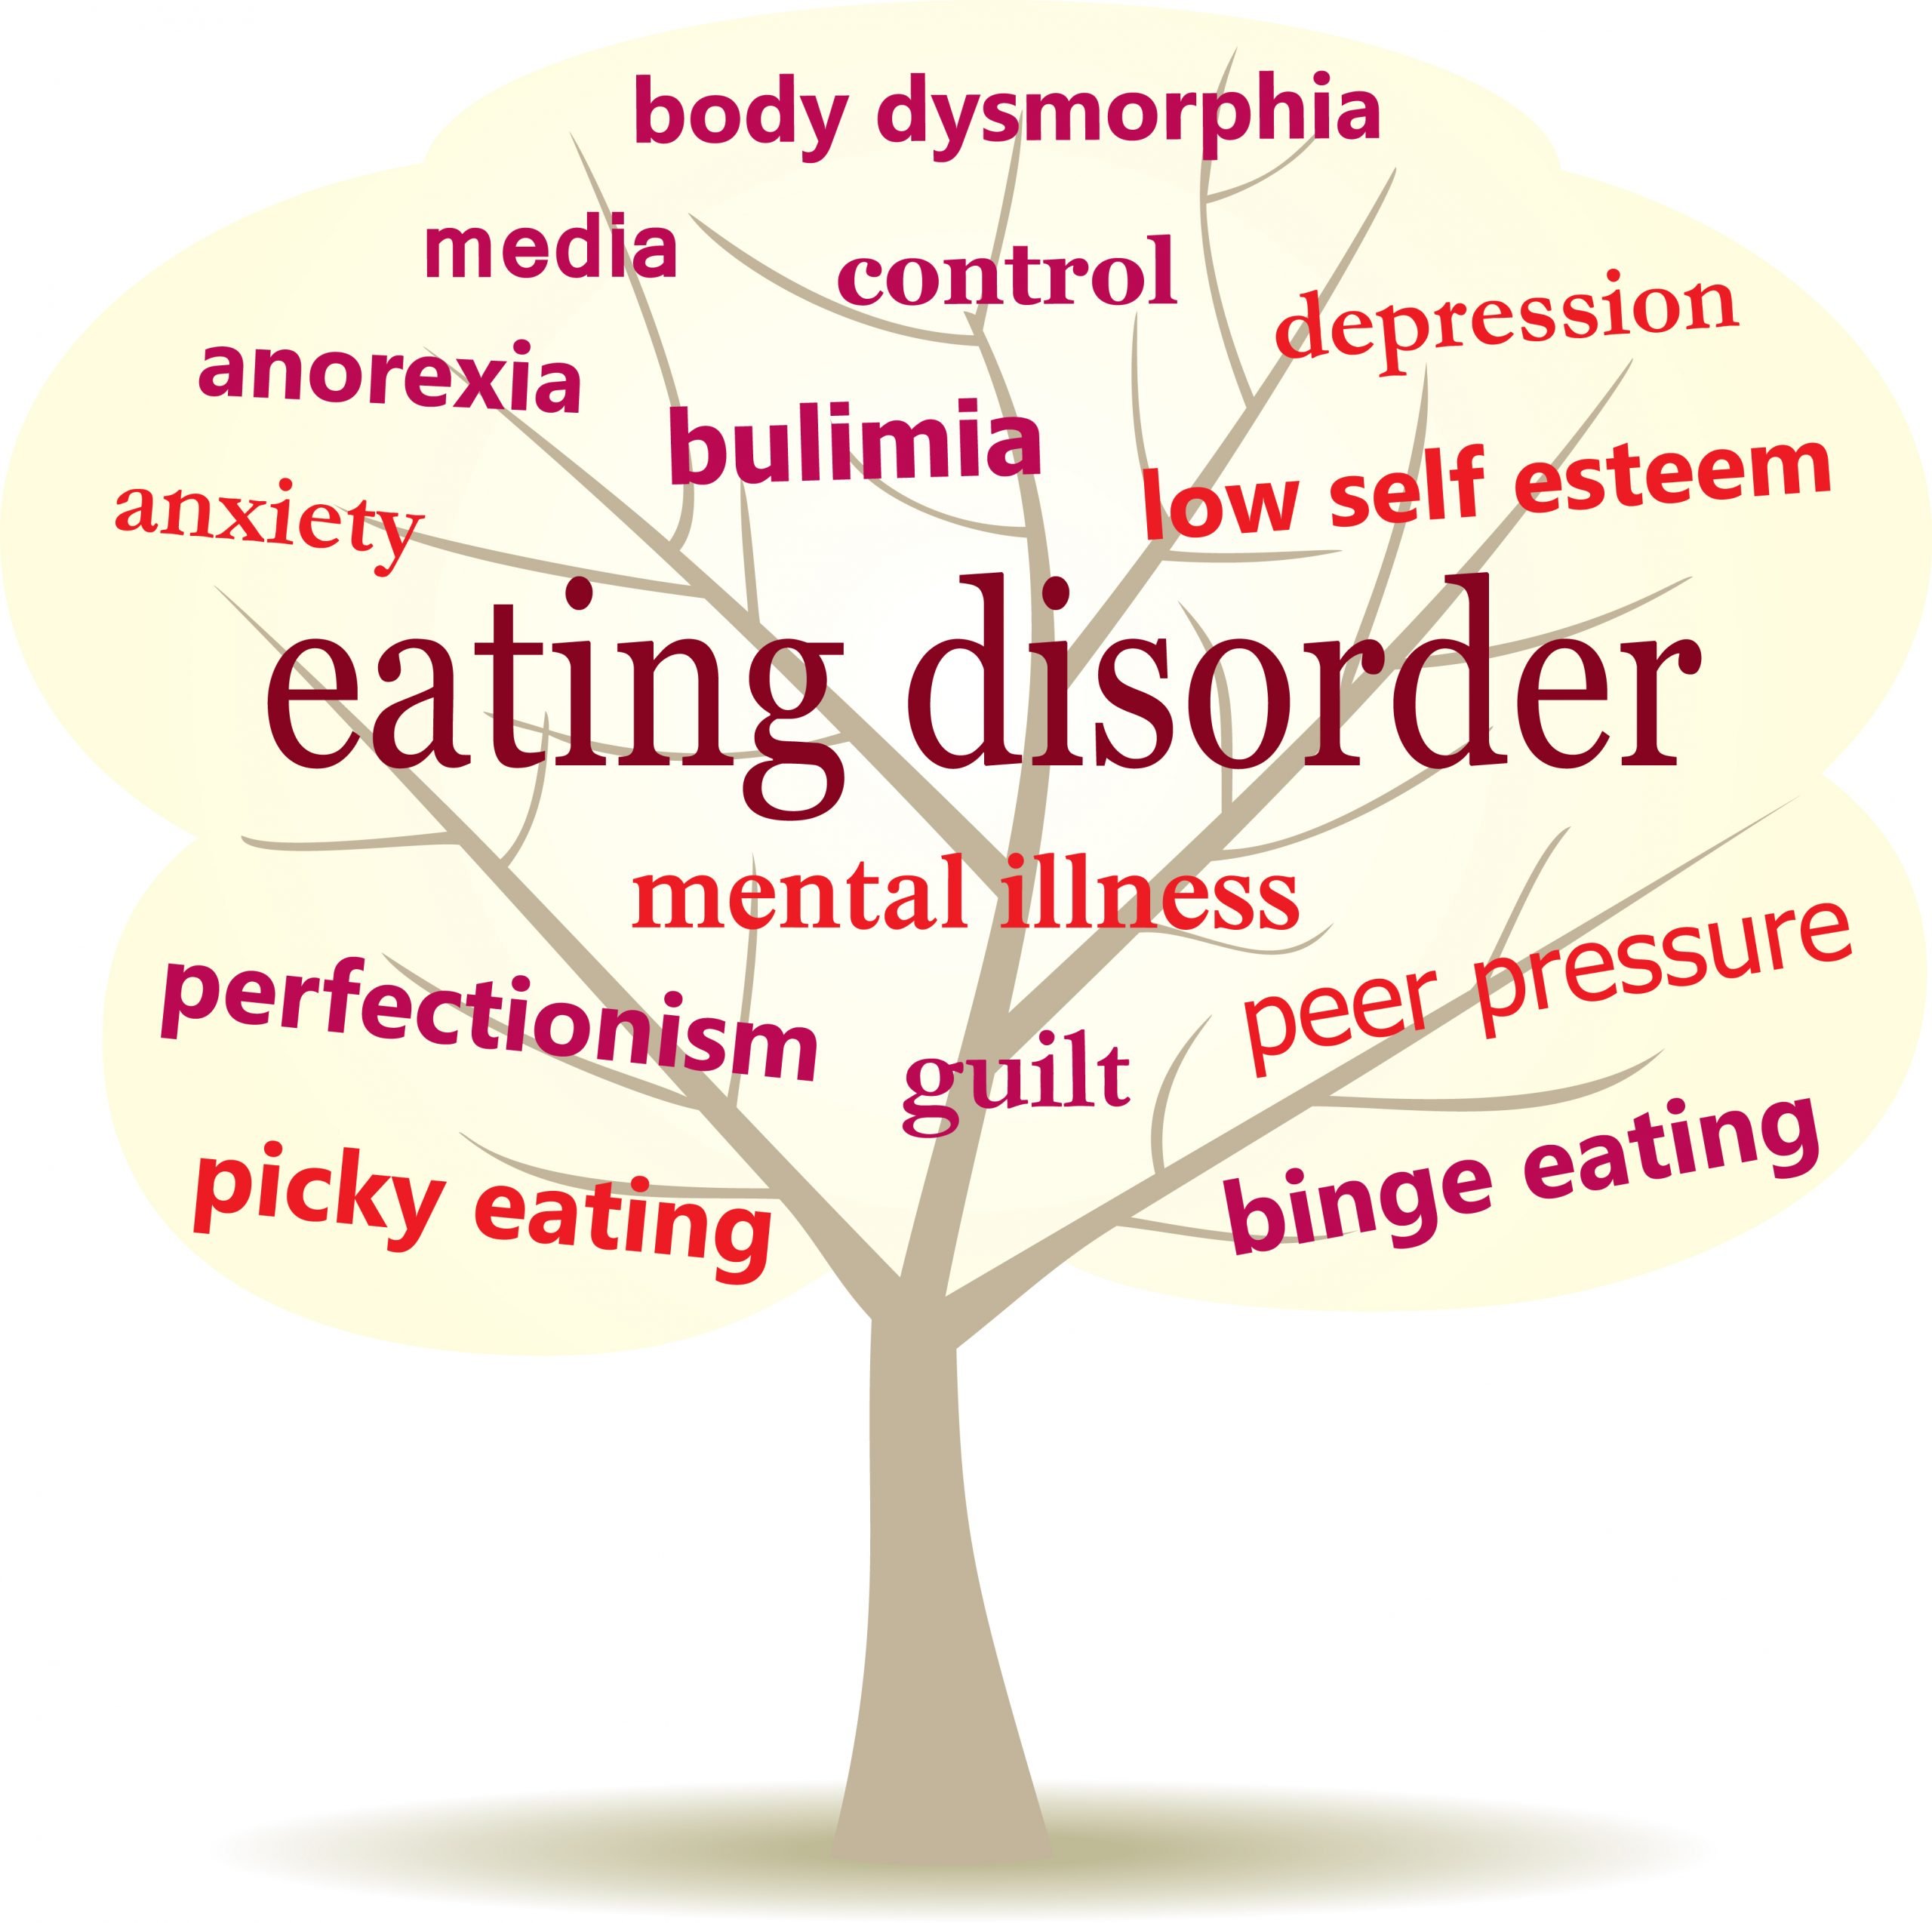 Addiction and Eating Disorders